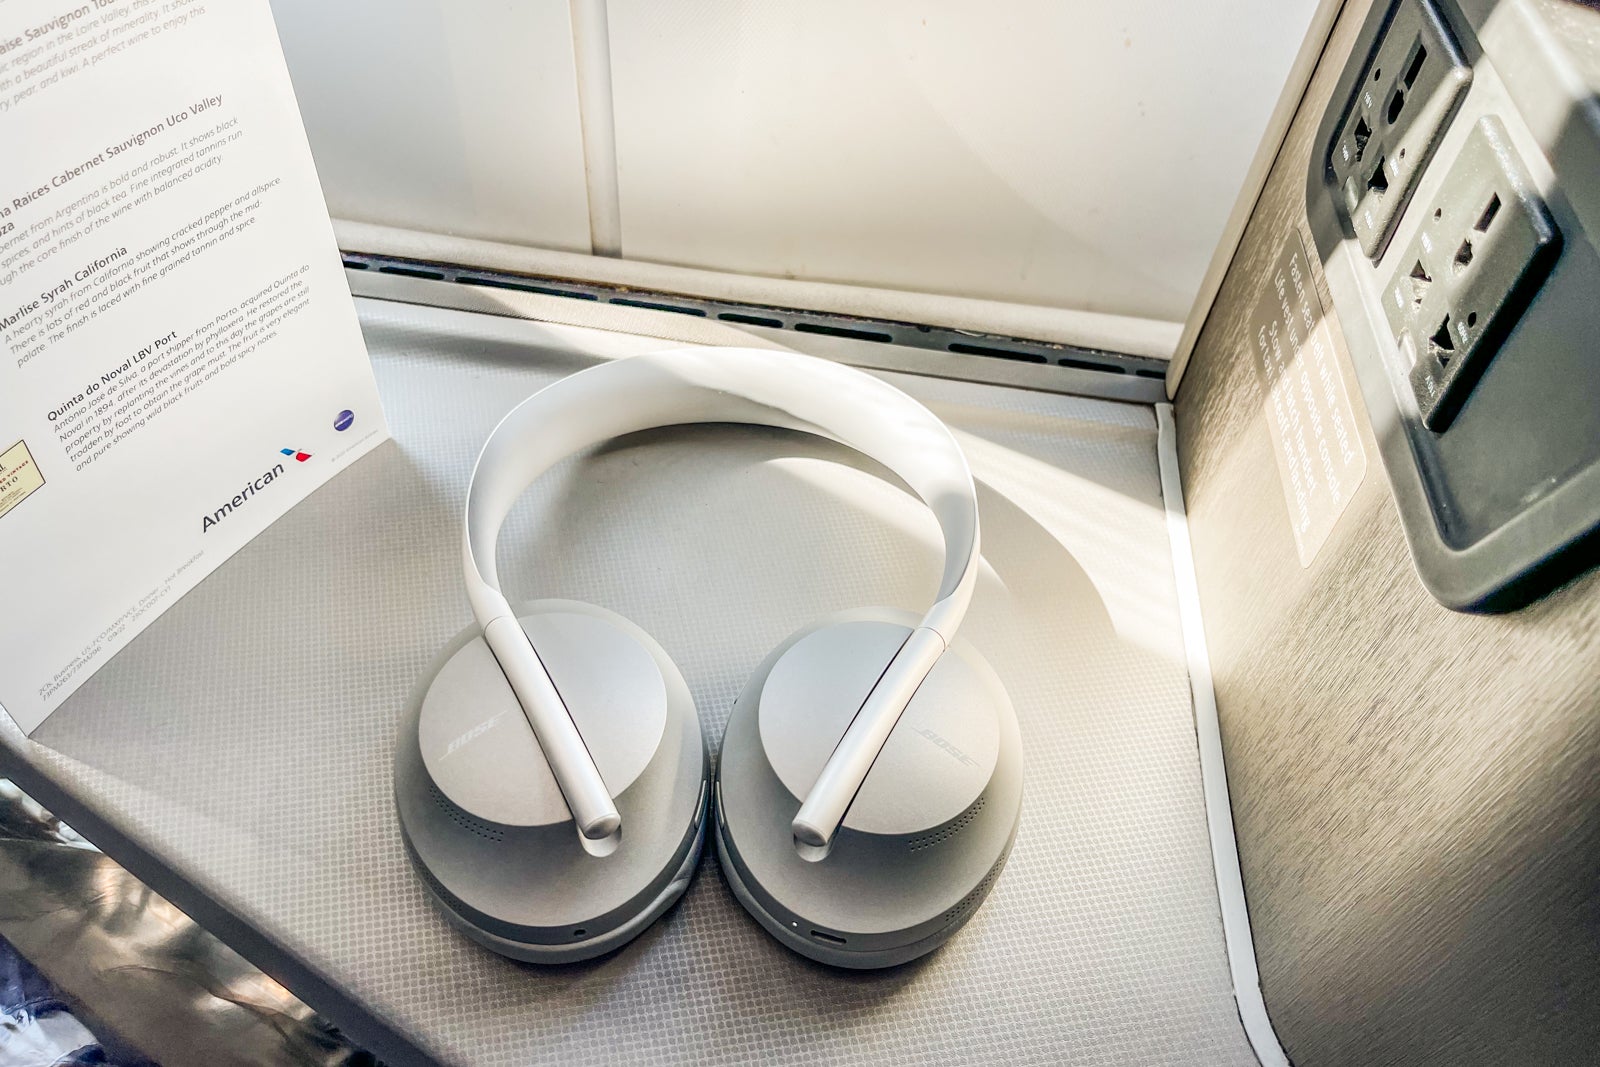 Bose Noise Cancelling Headphones 700 review: 1 of the best travel